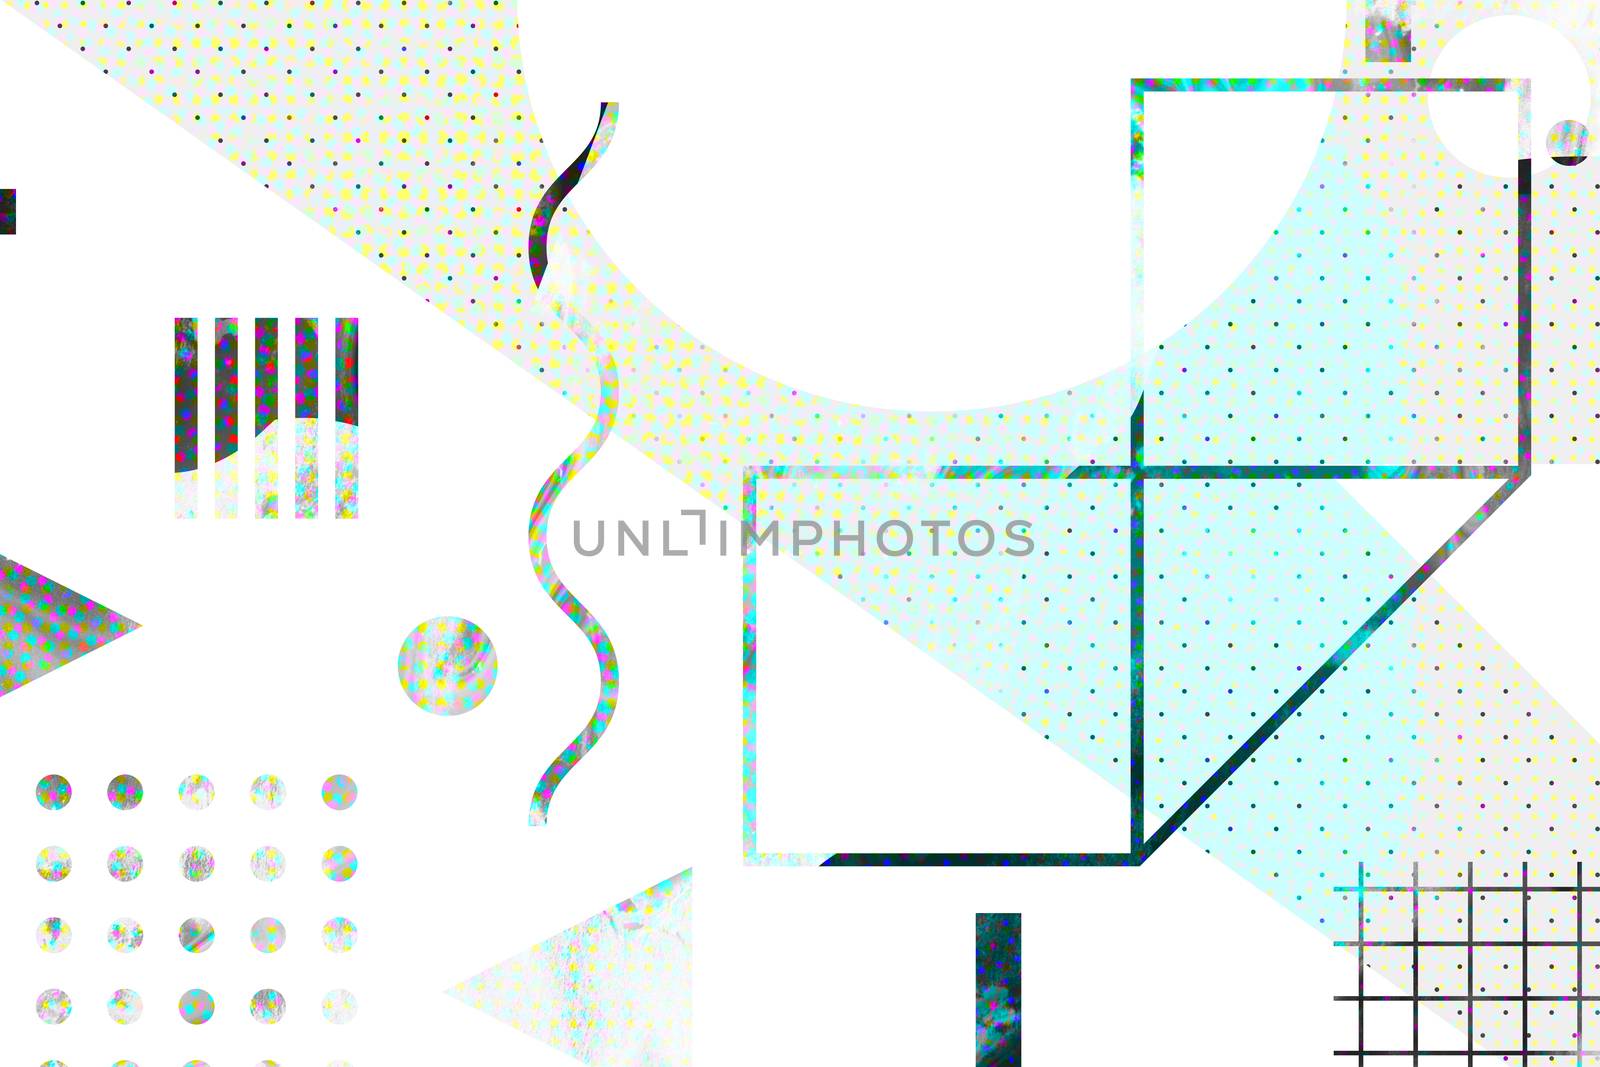 Original background with simple geometric shapes by Vanzyst